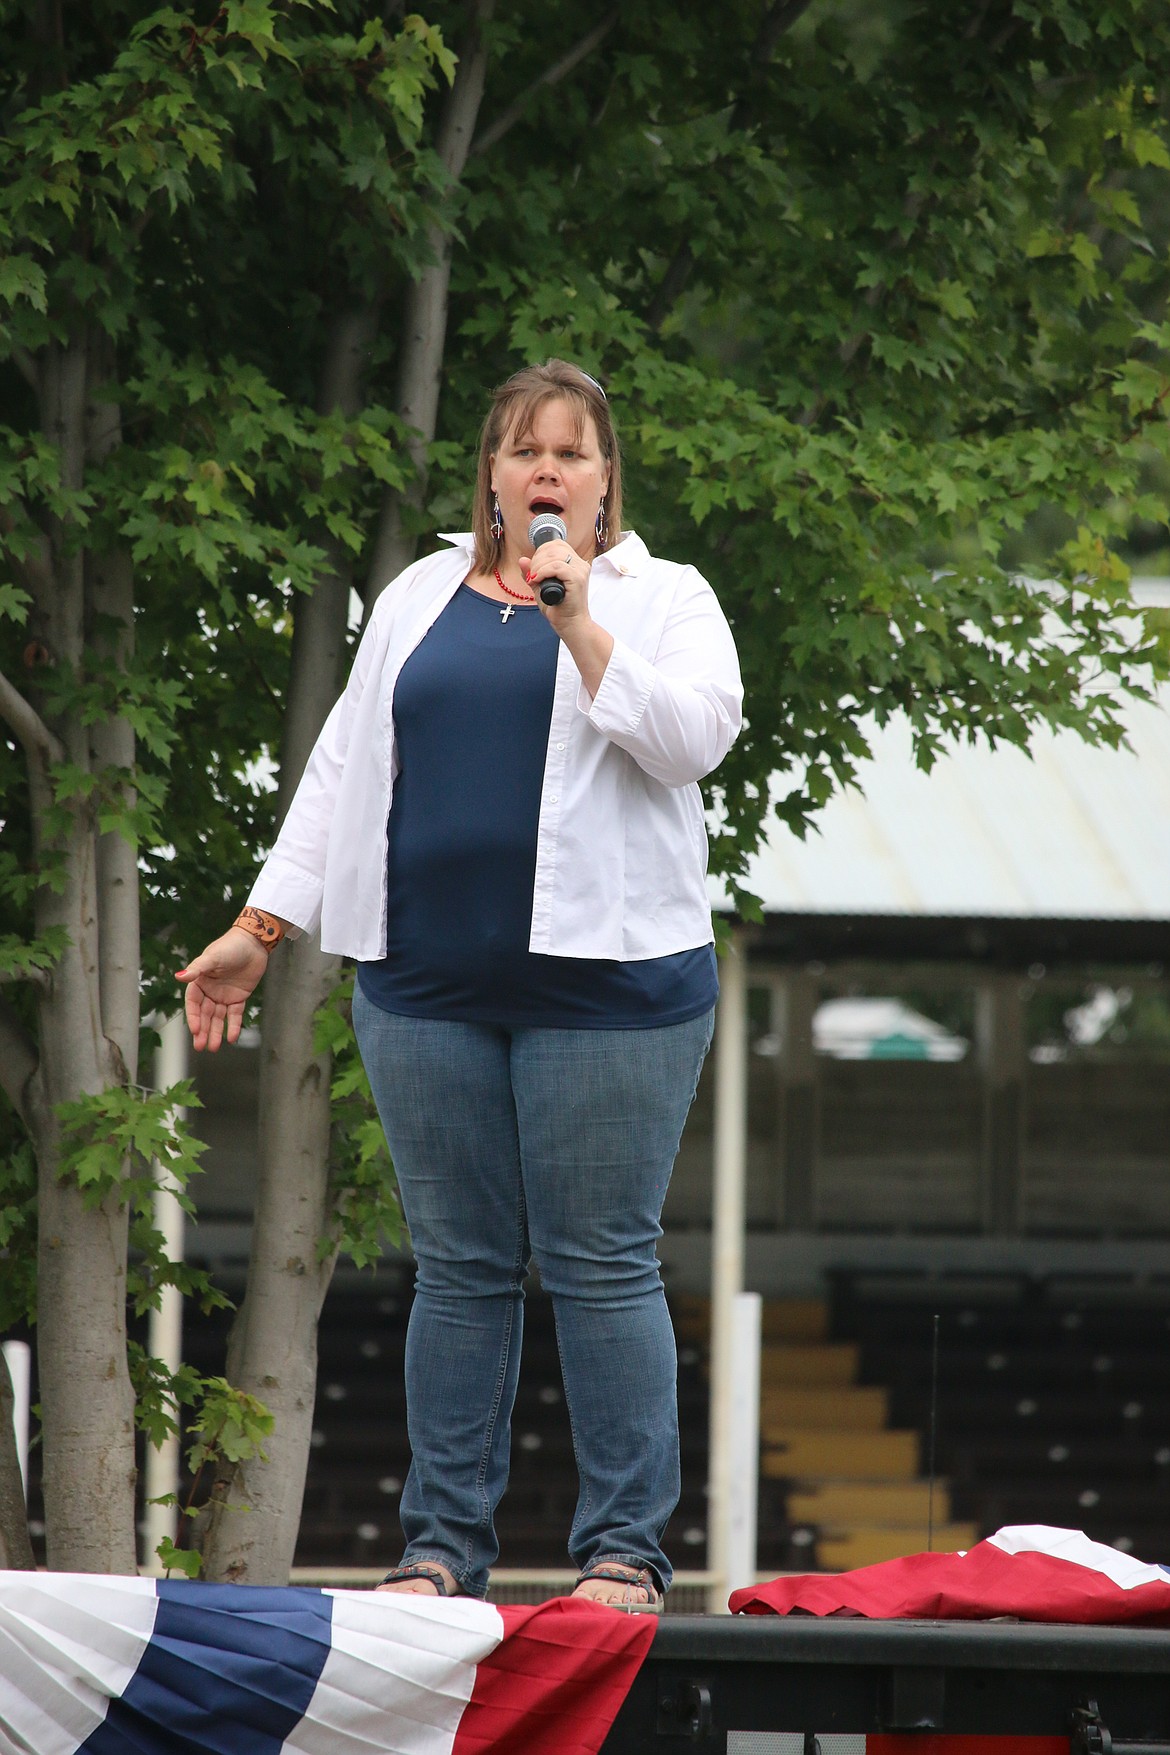 Photo by MANDI BATEMAN
Kristie Campbell singing the national anthem during the opeing ceremonies.